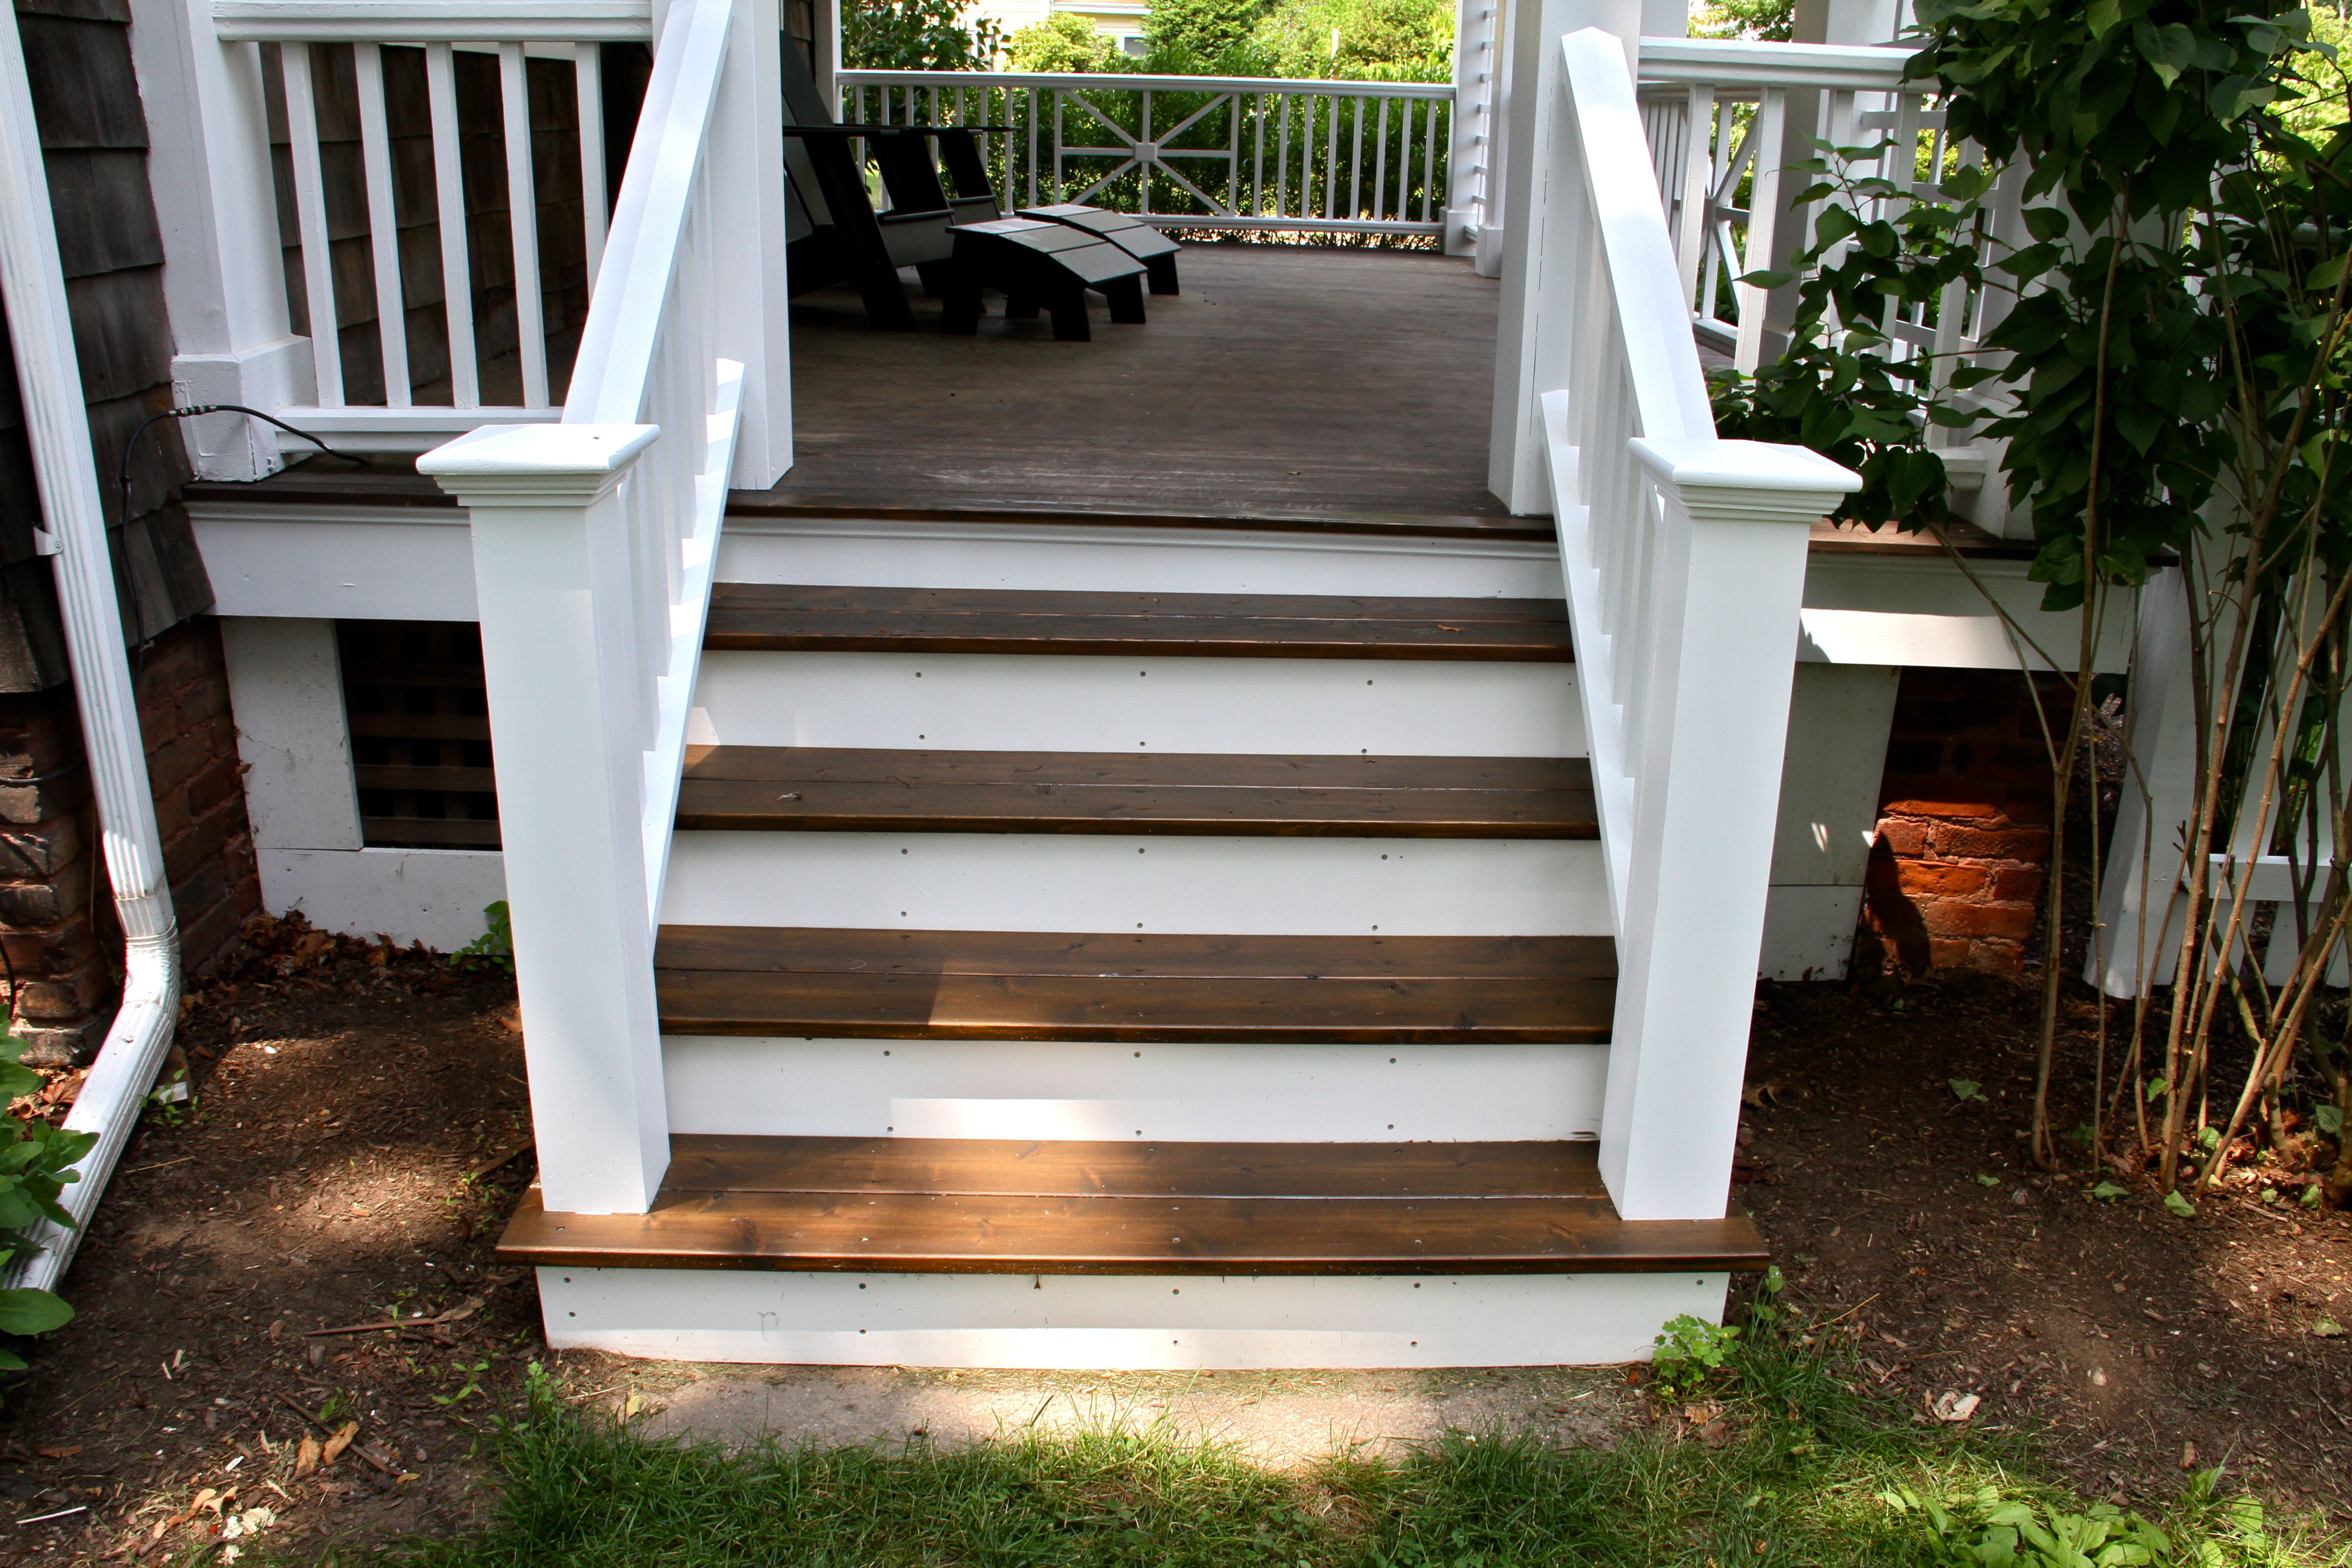 AFTER: The porch stairs, railings painted to match the rest of the trim and porch railings; treads re-stained with Cabot exterior oil-based stain in Burnt Hickory.